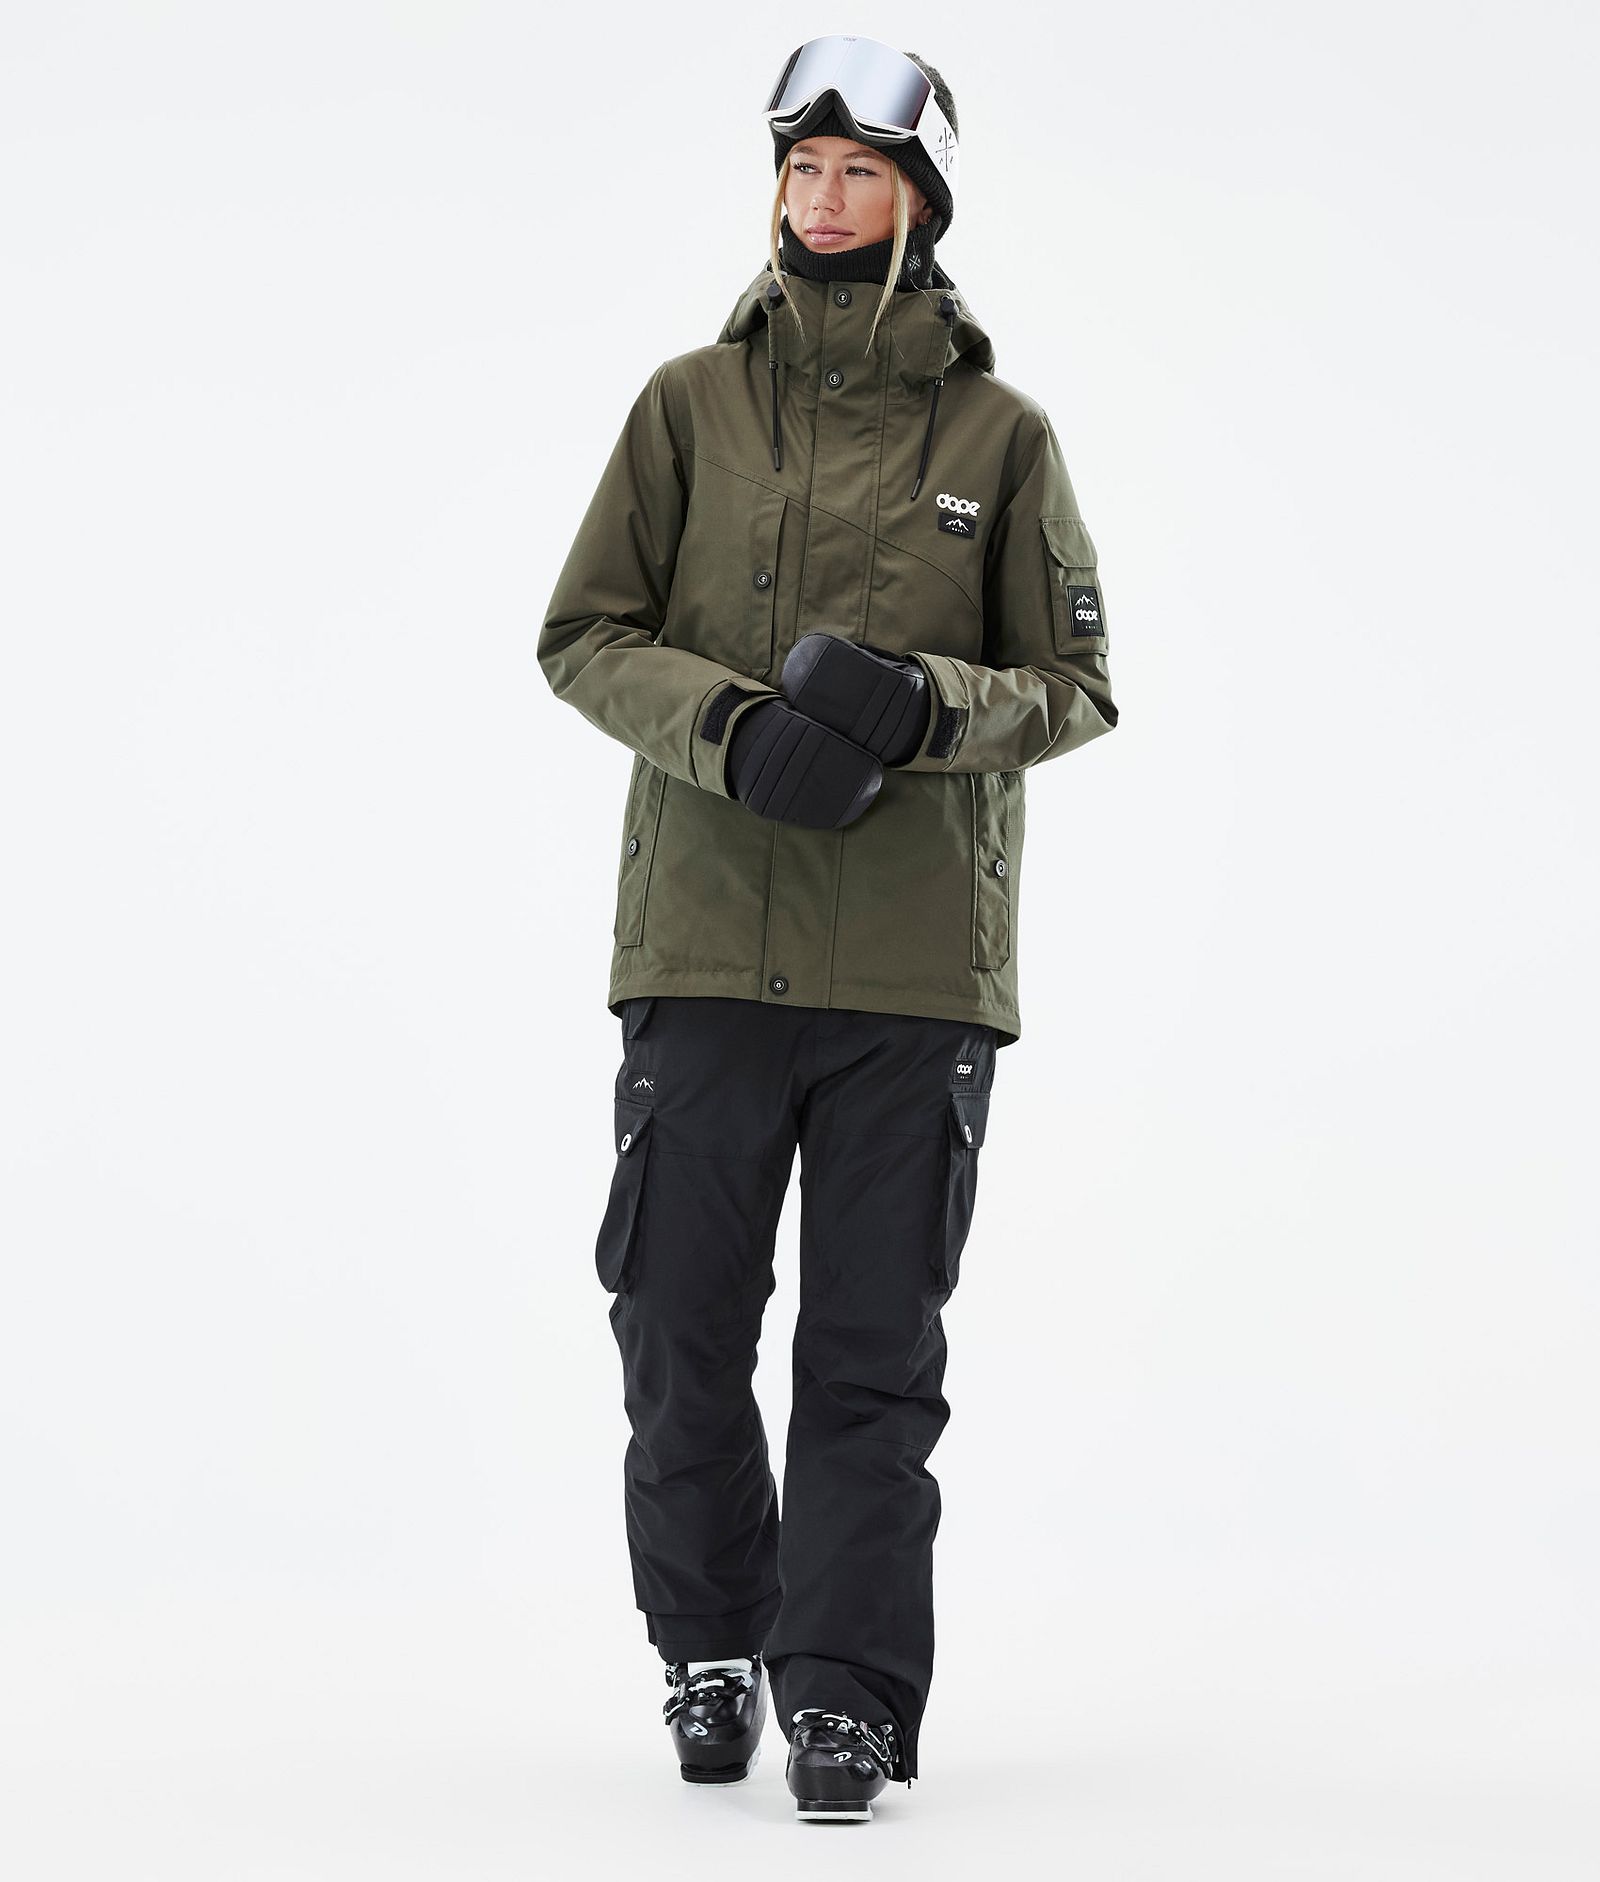 Adept W Ski Outfit Women Olive Green/Black